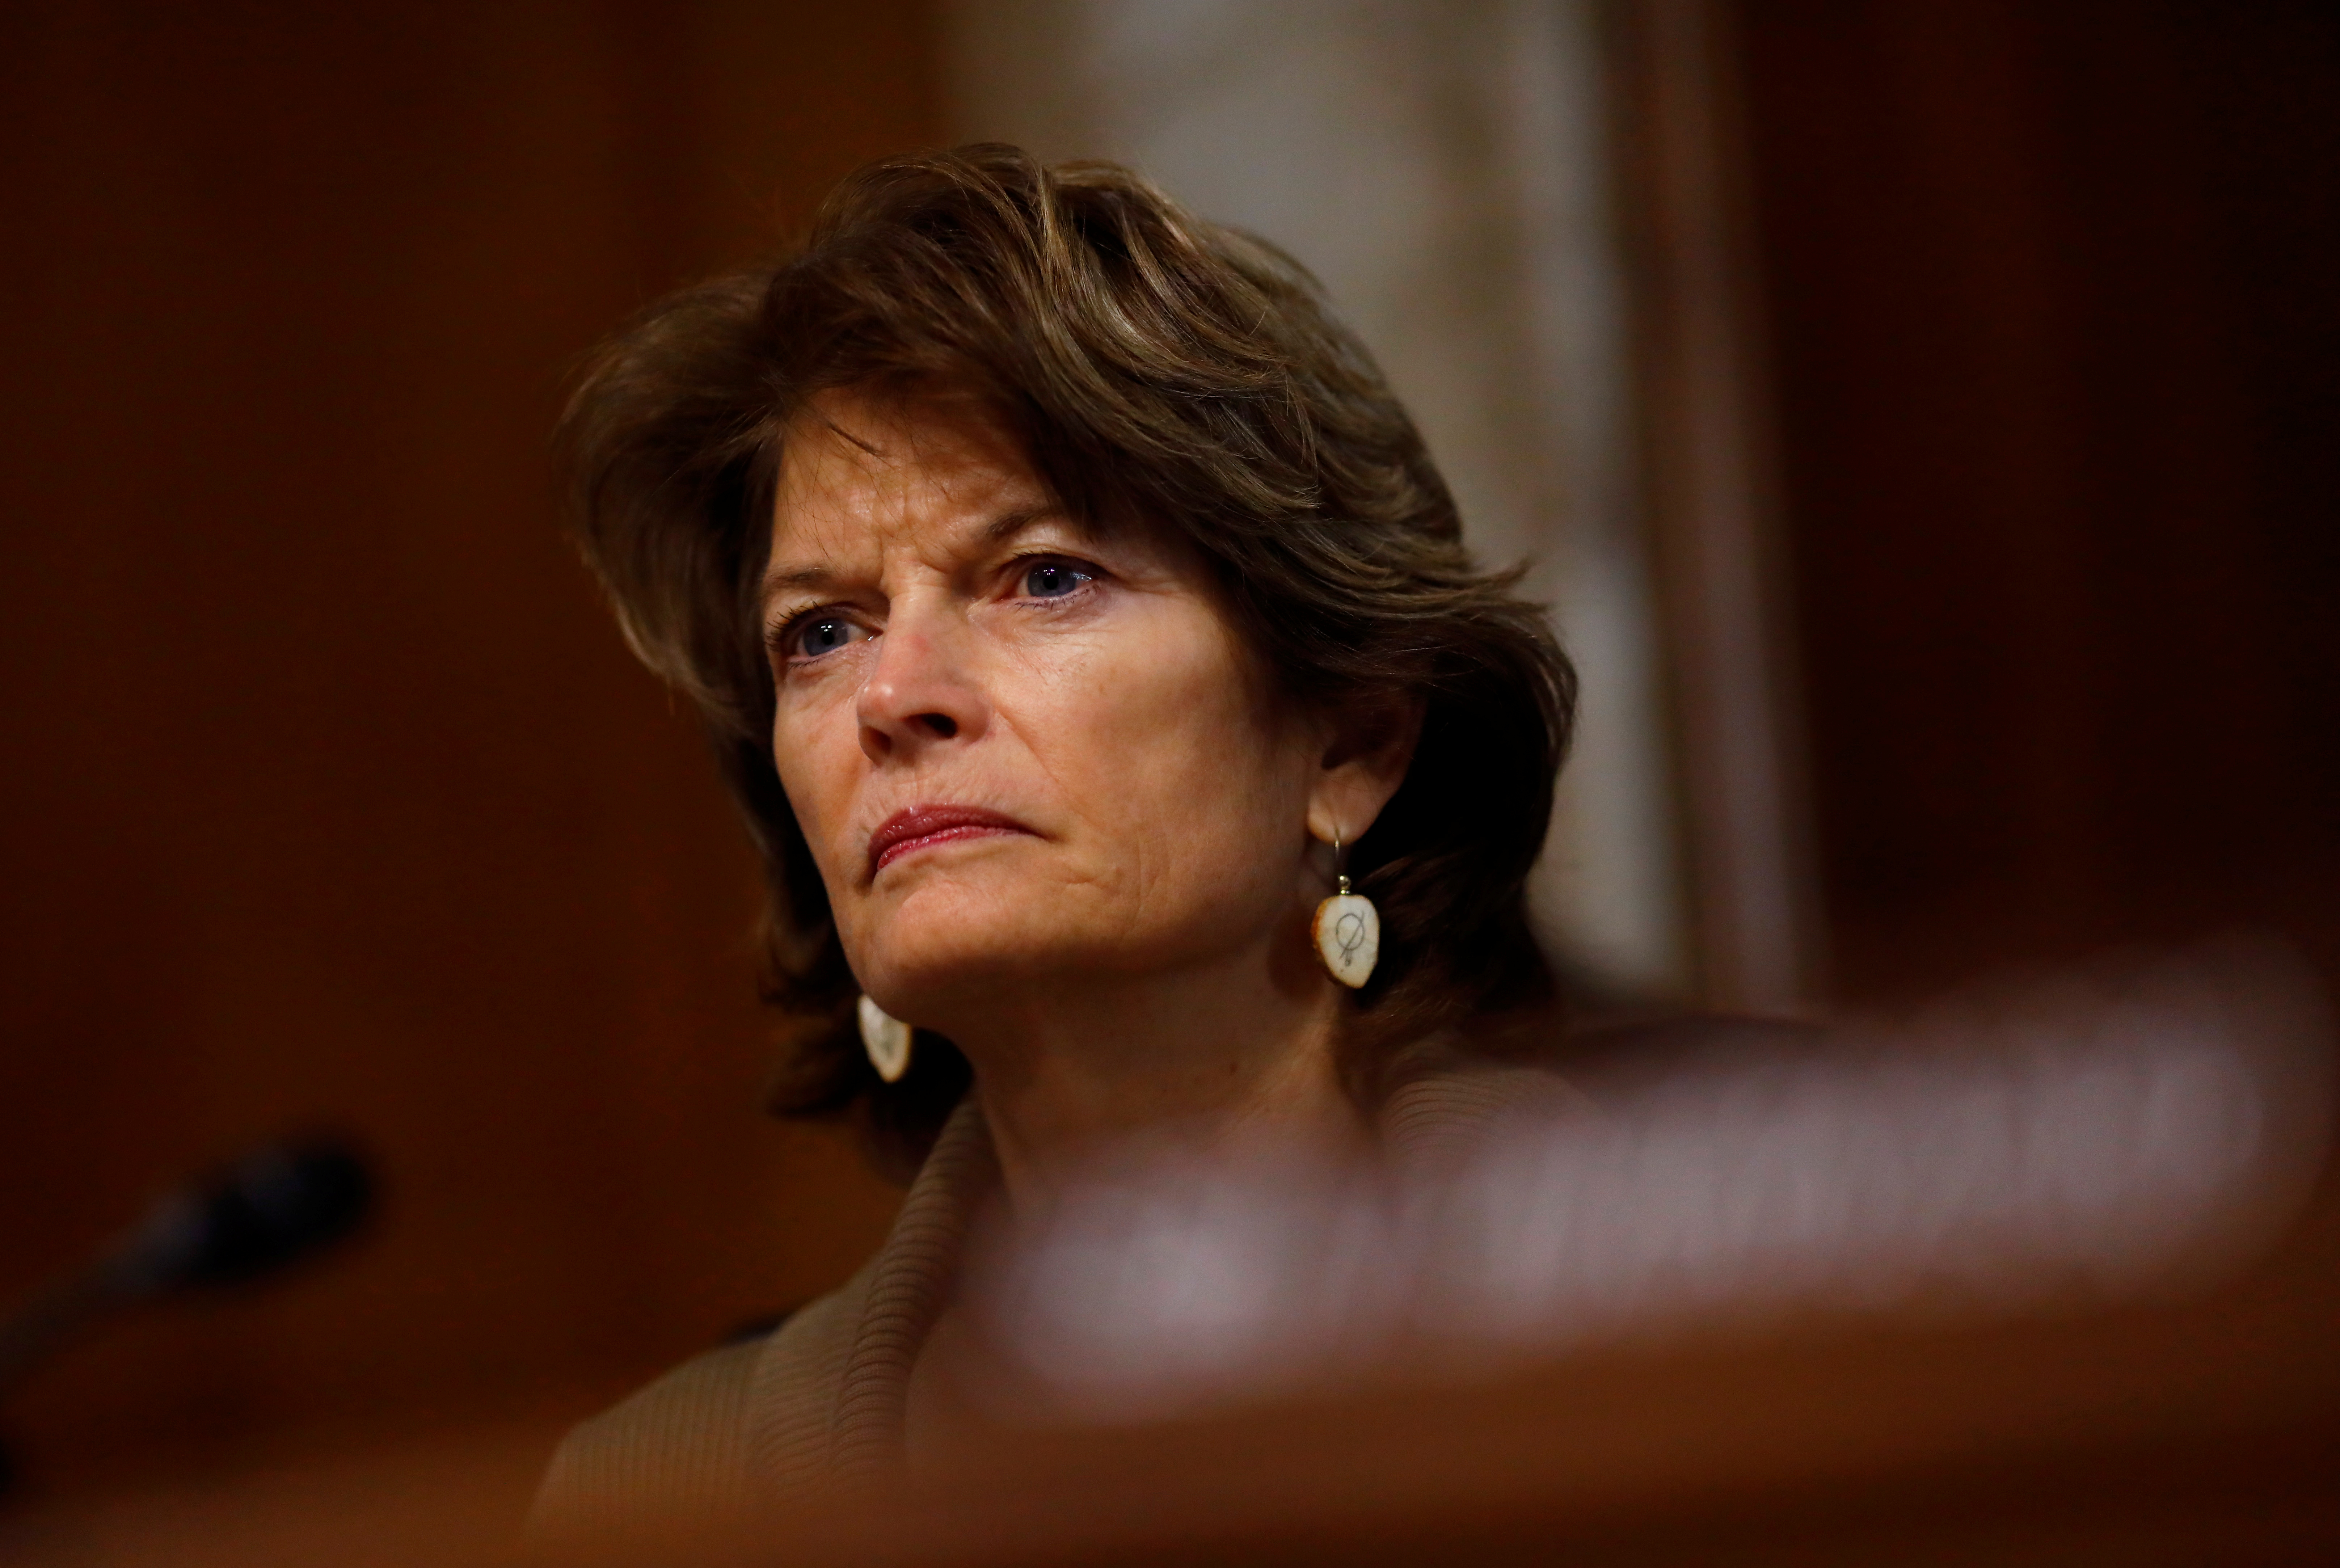 Chairwoman Lisa Murkowski (R-AK) speaks during a hearing of the Senate Committee on Energy and Natural Resources on Capitol Hill in Washington